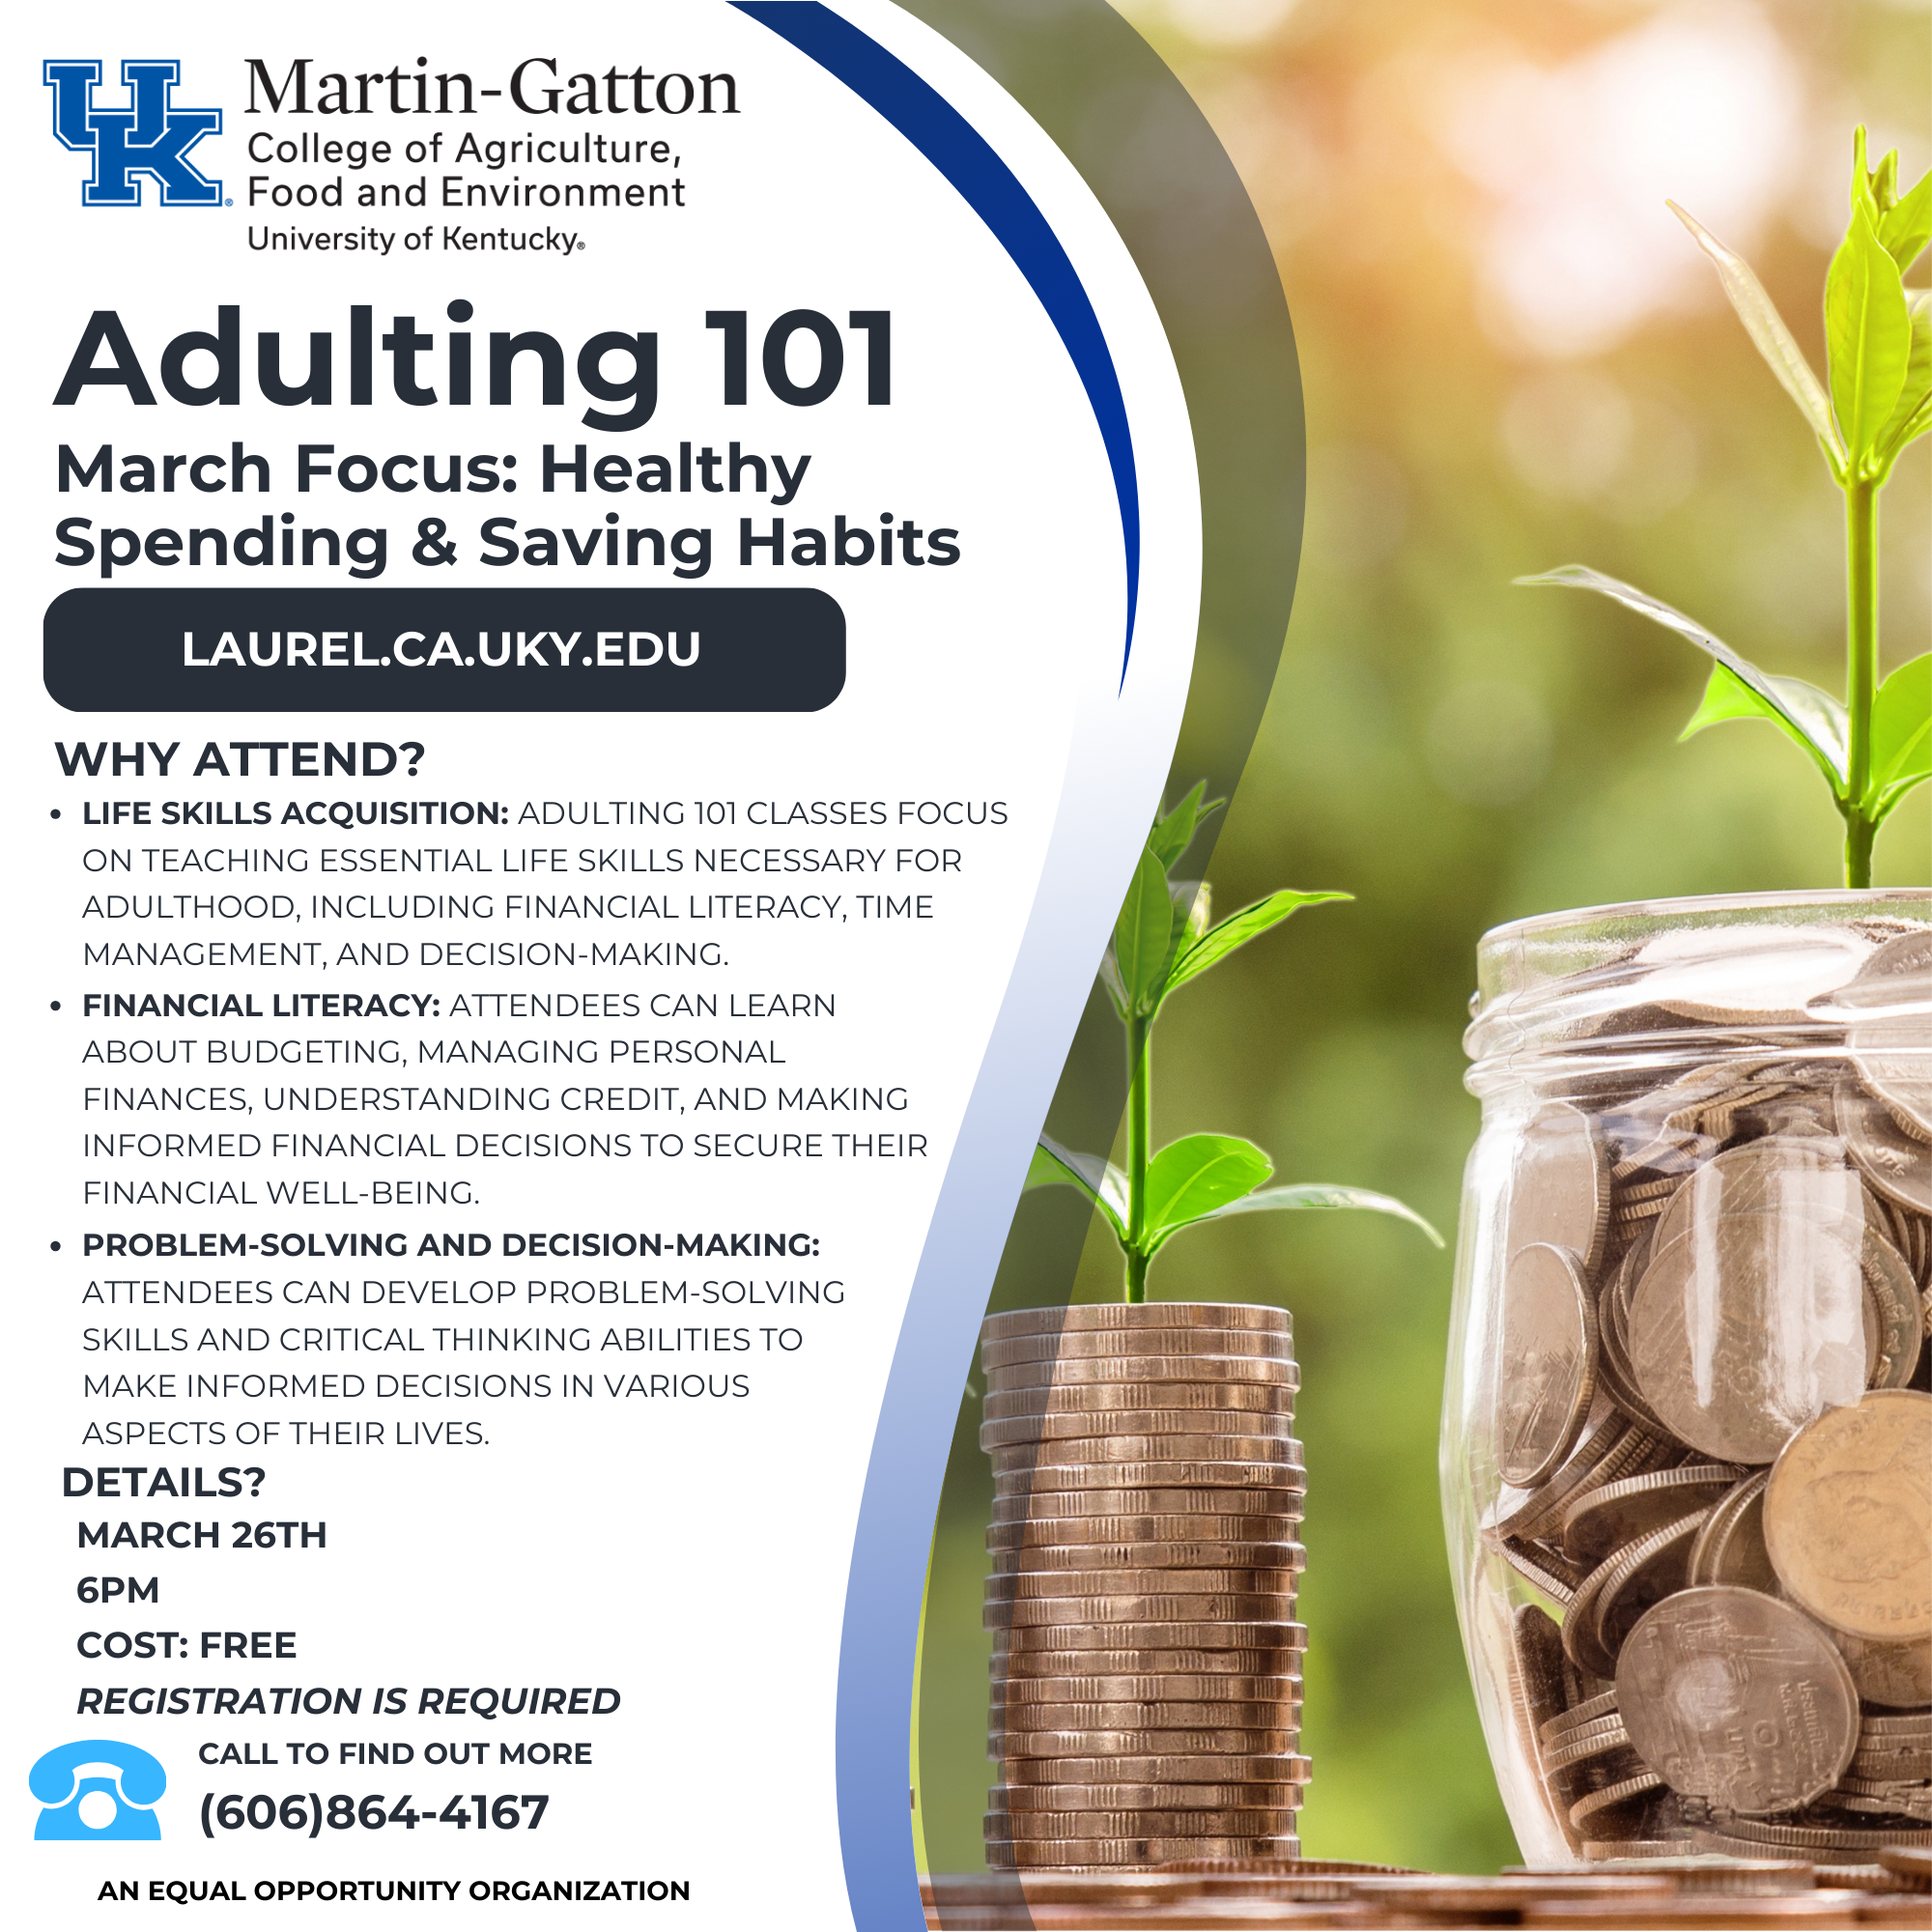 Flyer detailing class details such as date, time, and description. Background includes a jar with coins and a stack of coins, both having a sprout of greenery from the top.